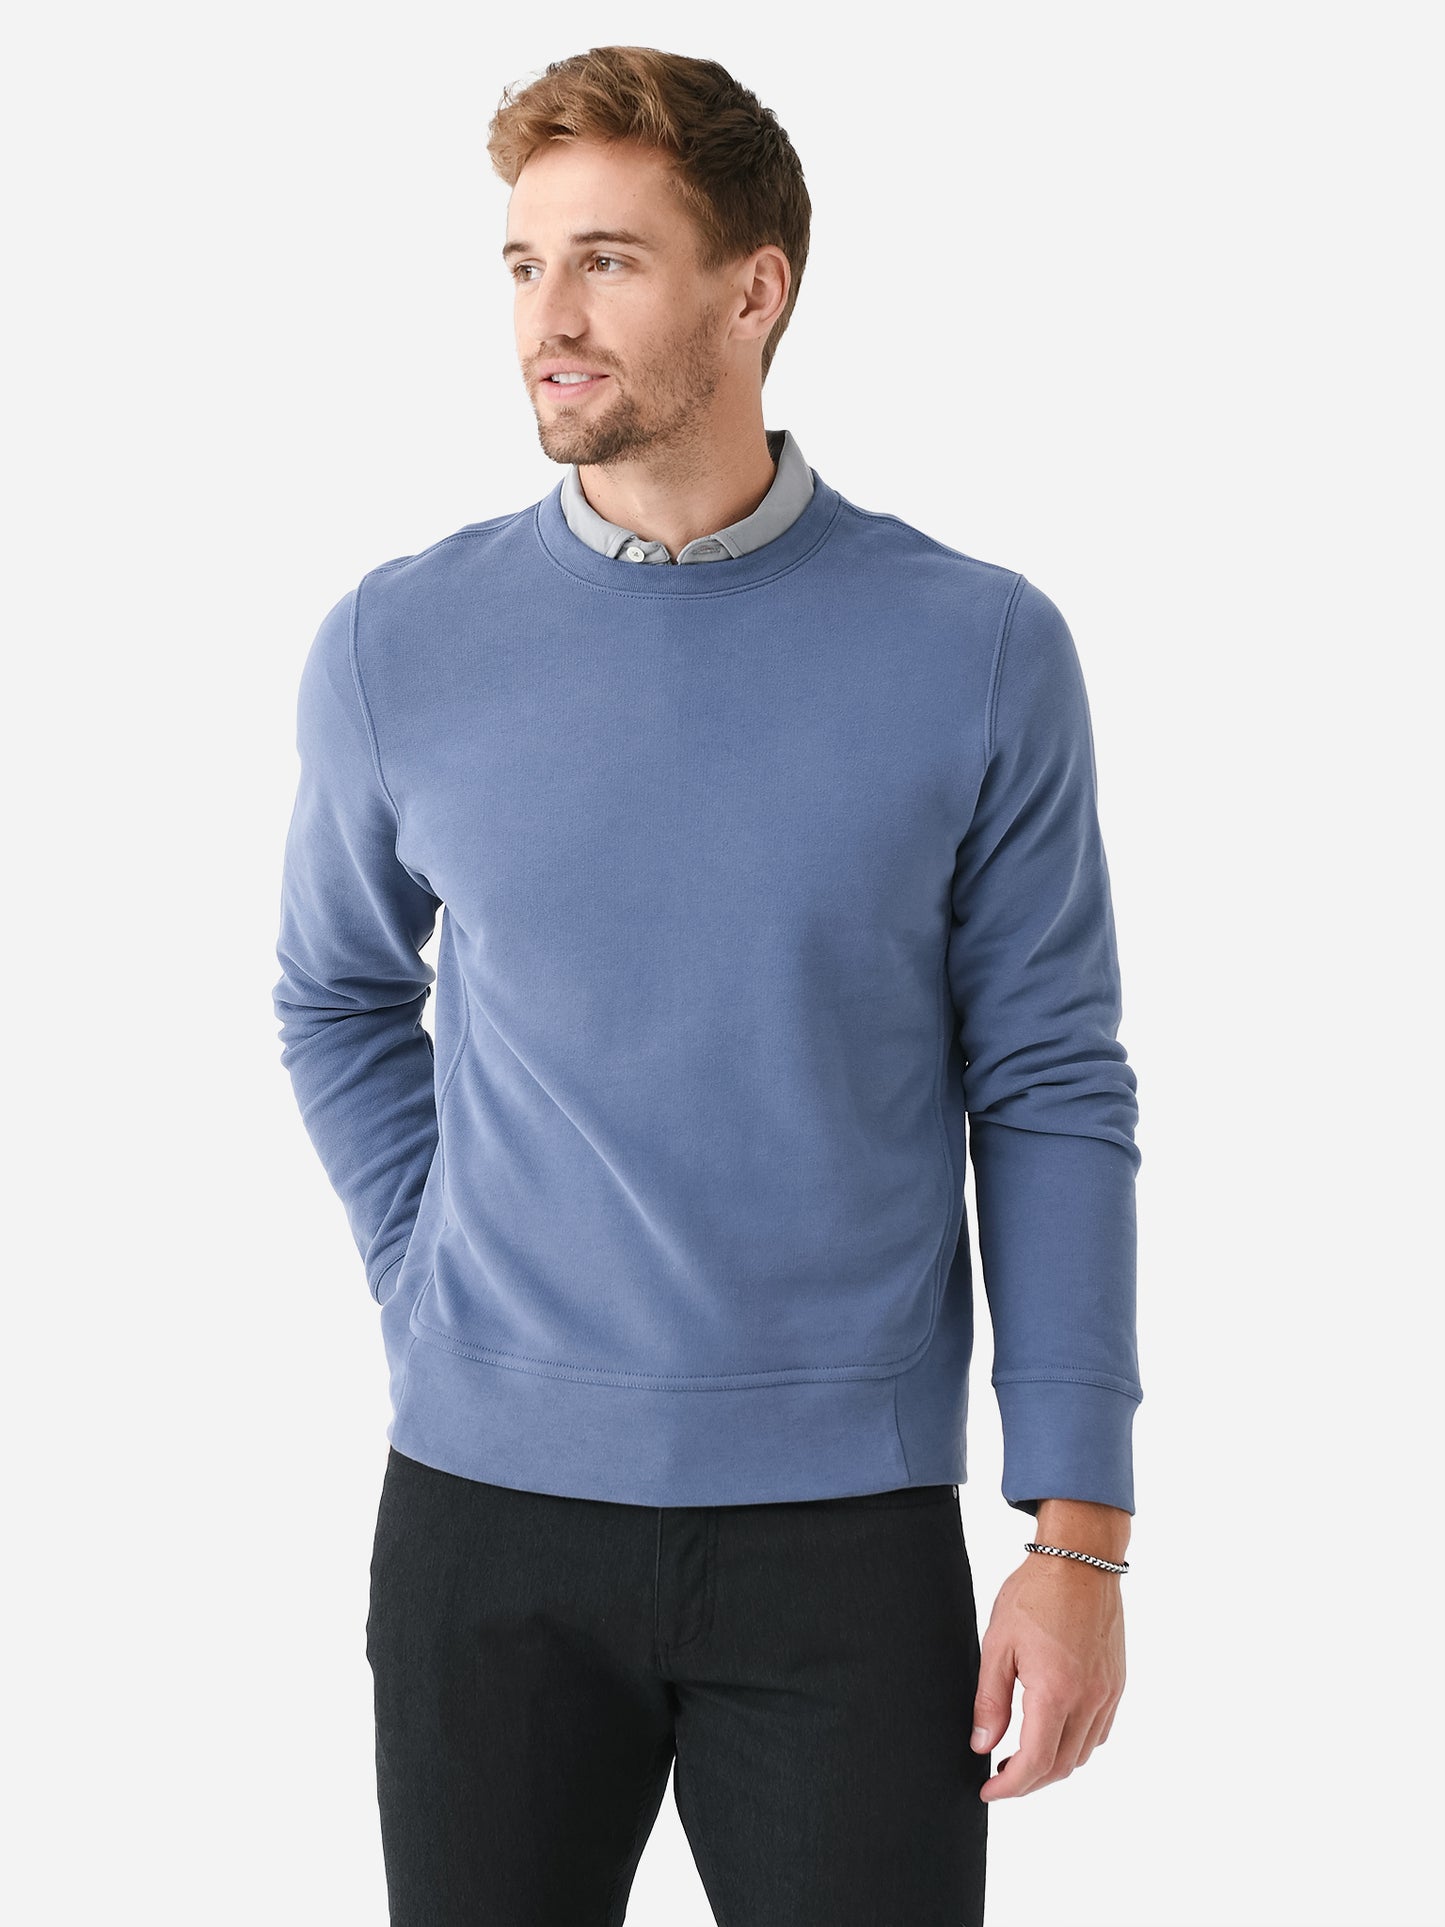 Orchard + Broome Men's Forsyth Sueded Terry Sweatshirt